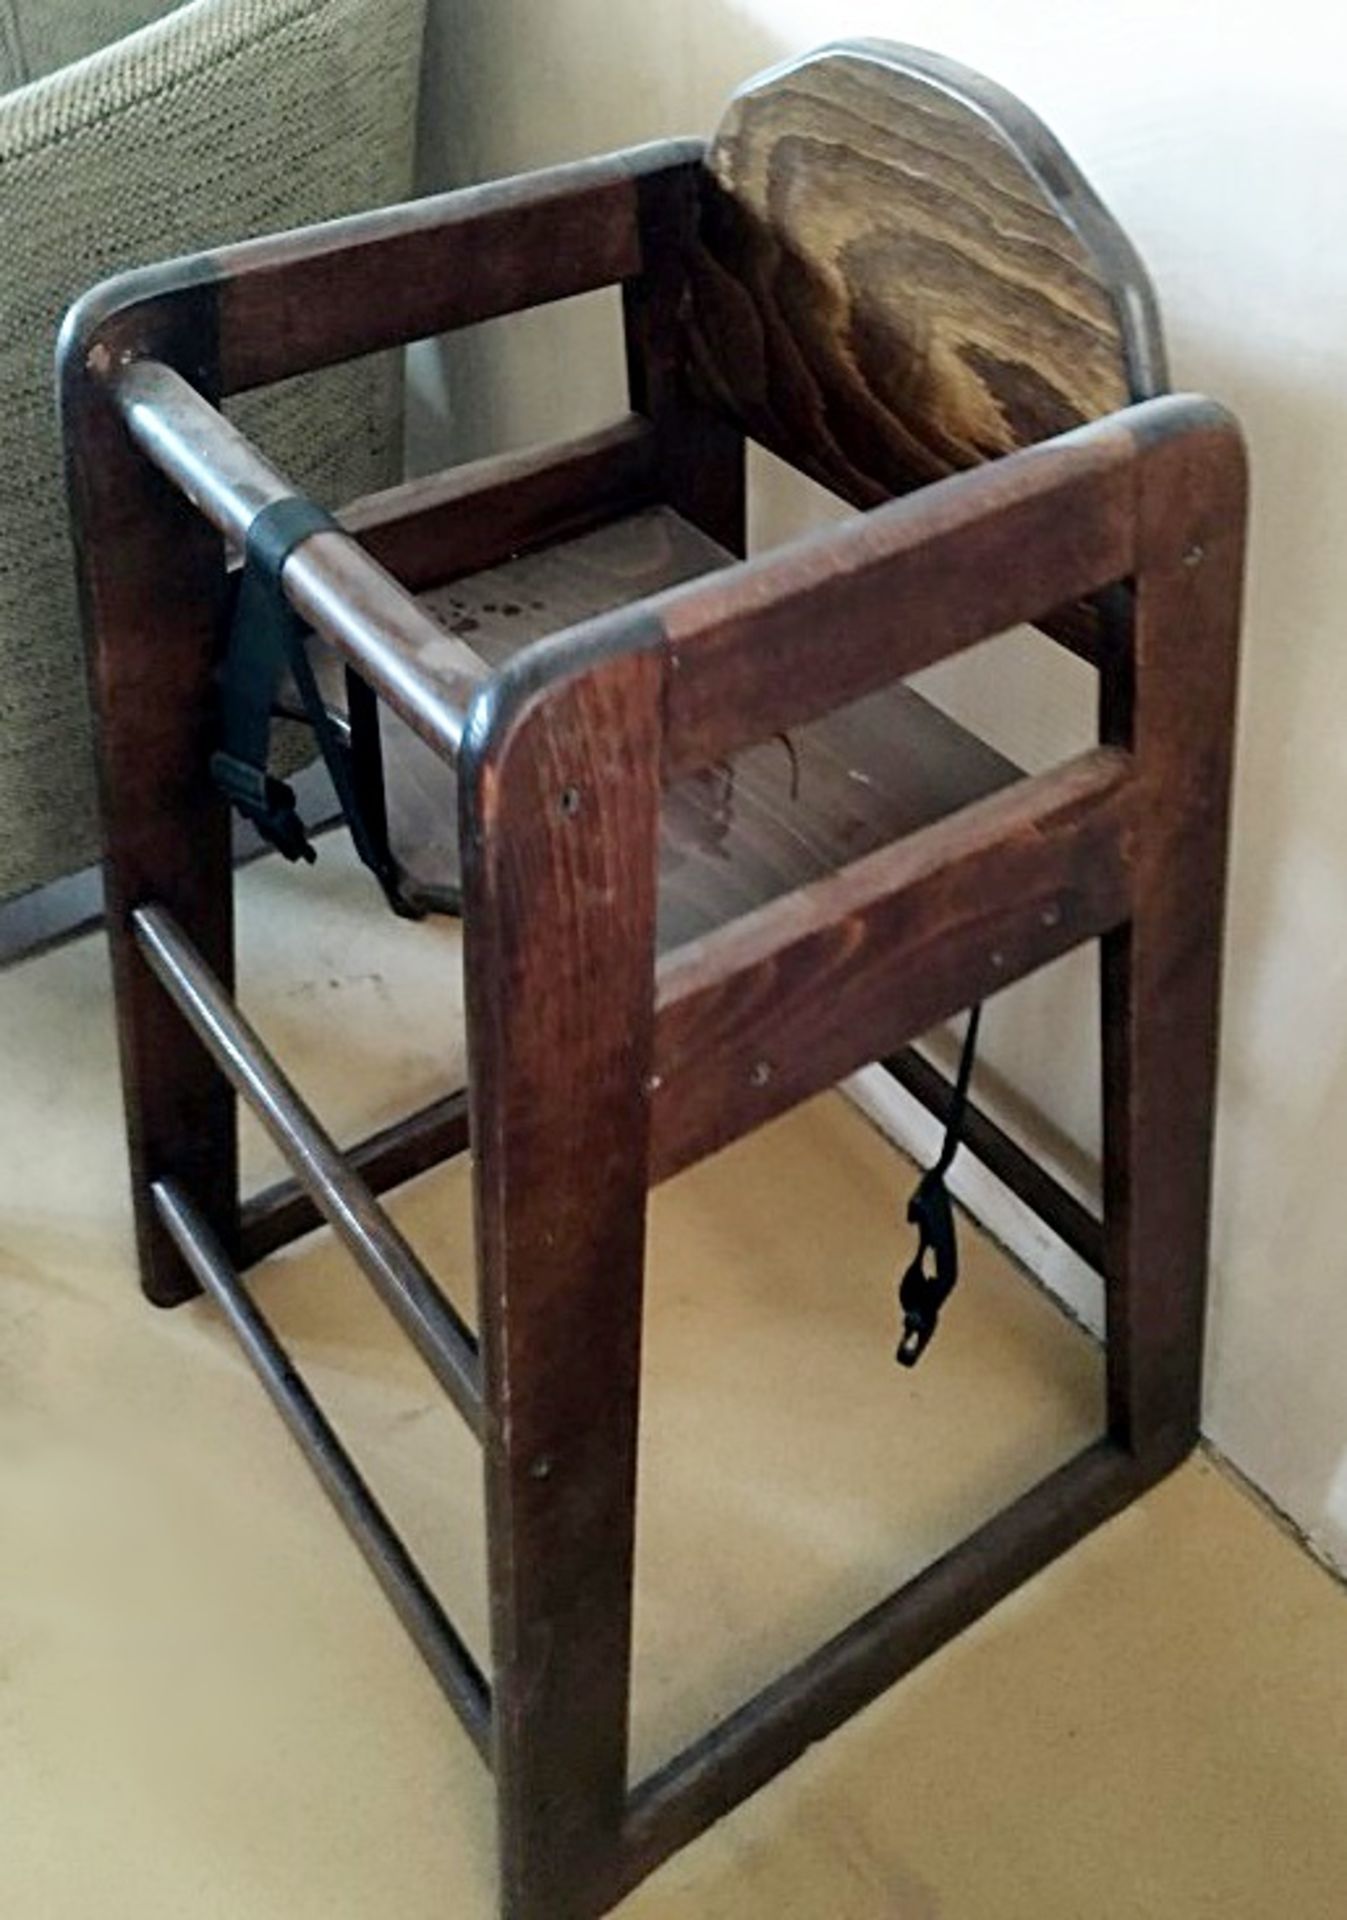 1 x Solid Wood Childs High Chair - All Recently Taken From A Bar & Restaurant Environment - - Image 3 of 8